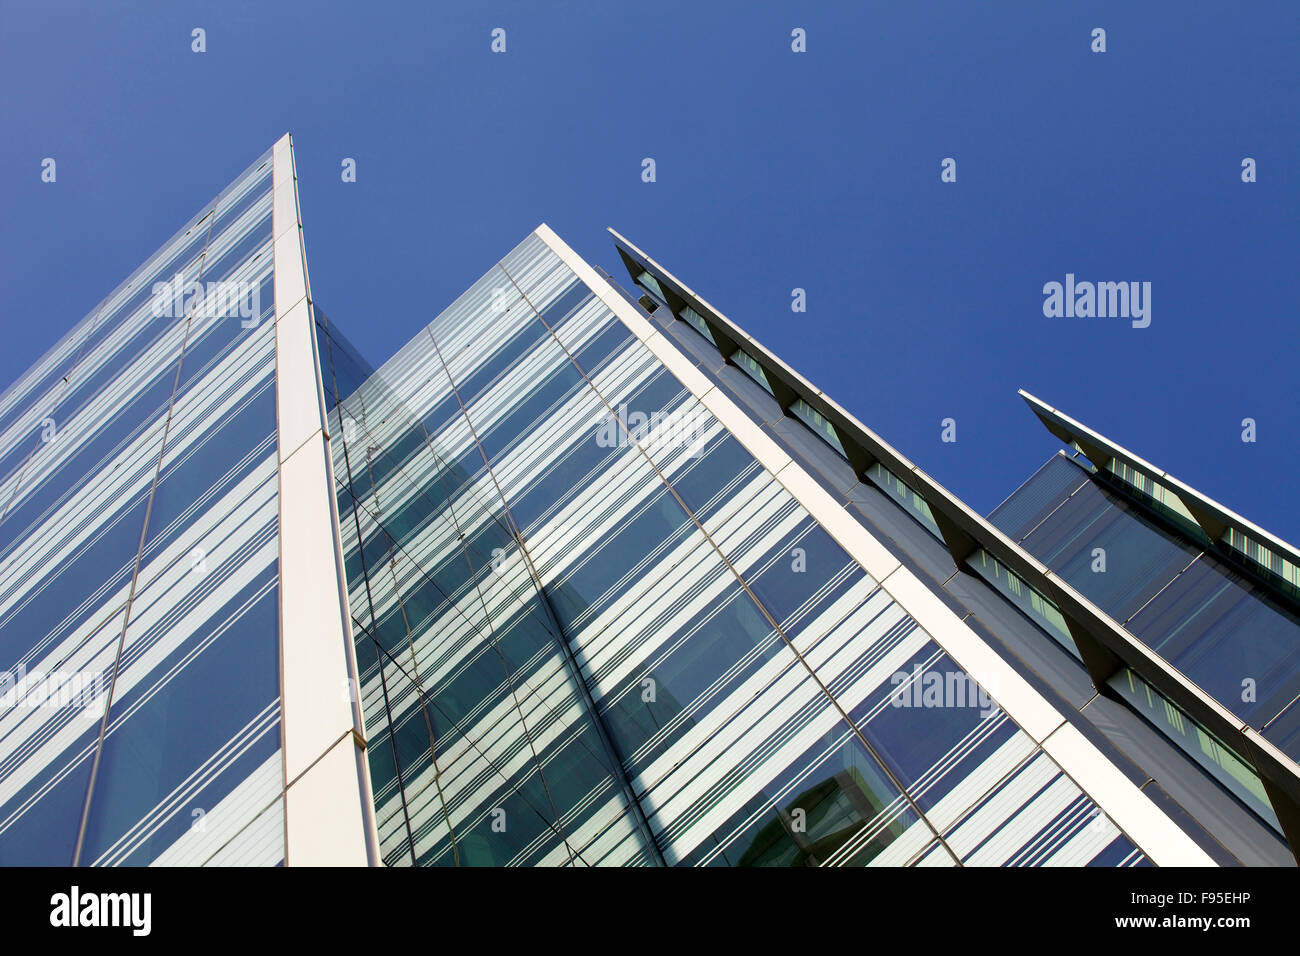 10 Hammersmith Grove W6 London. New office development by Wates Construction for Development Securities in Hammersmith, London. Exterior view of office building. Contemporary architecture with a glass facade. Stock Photo